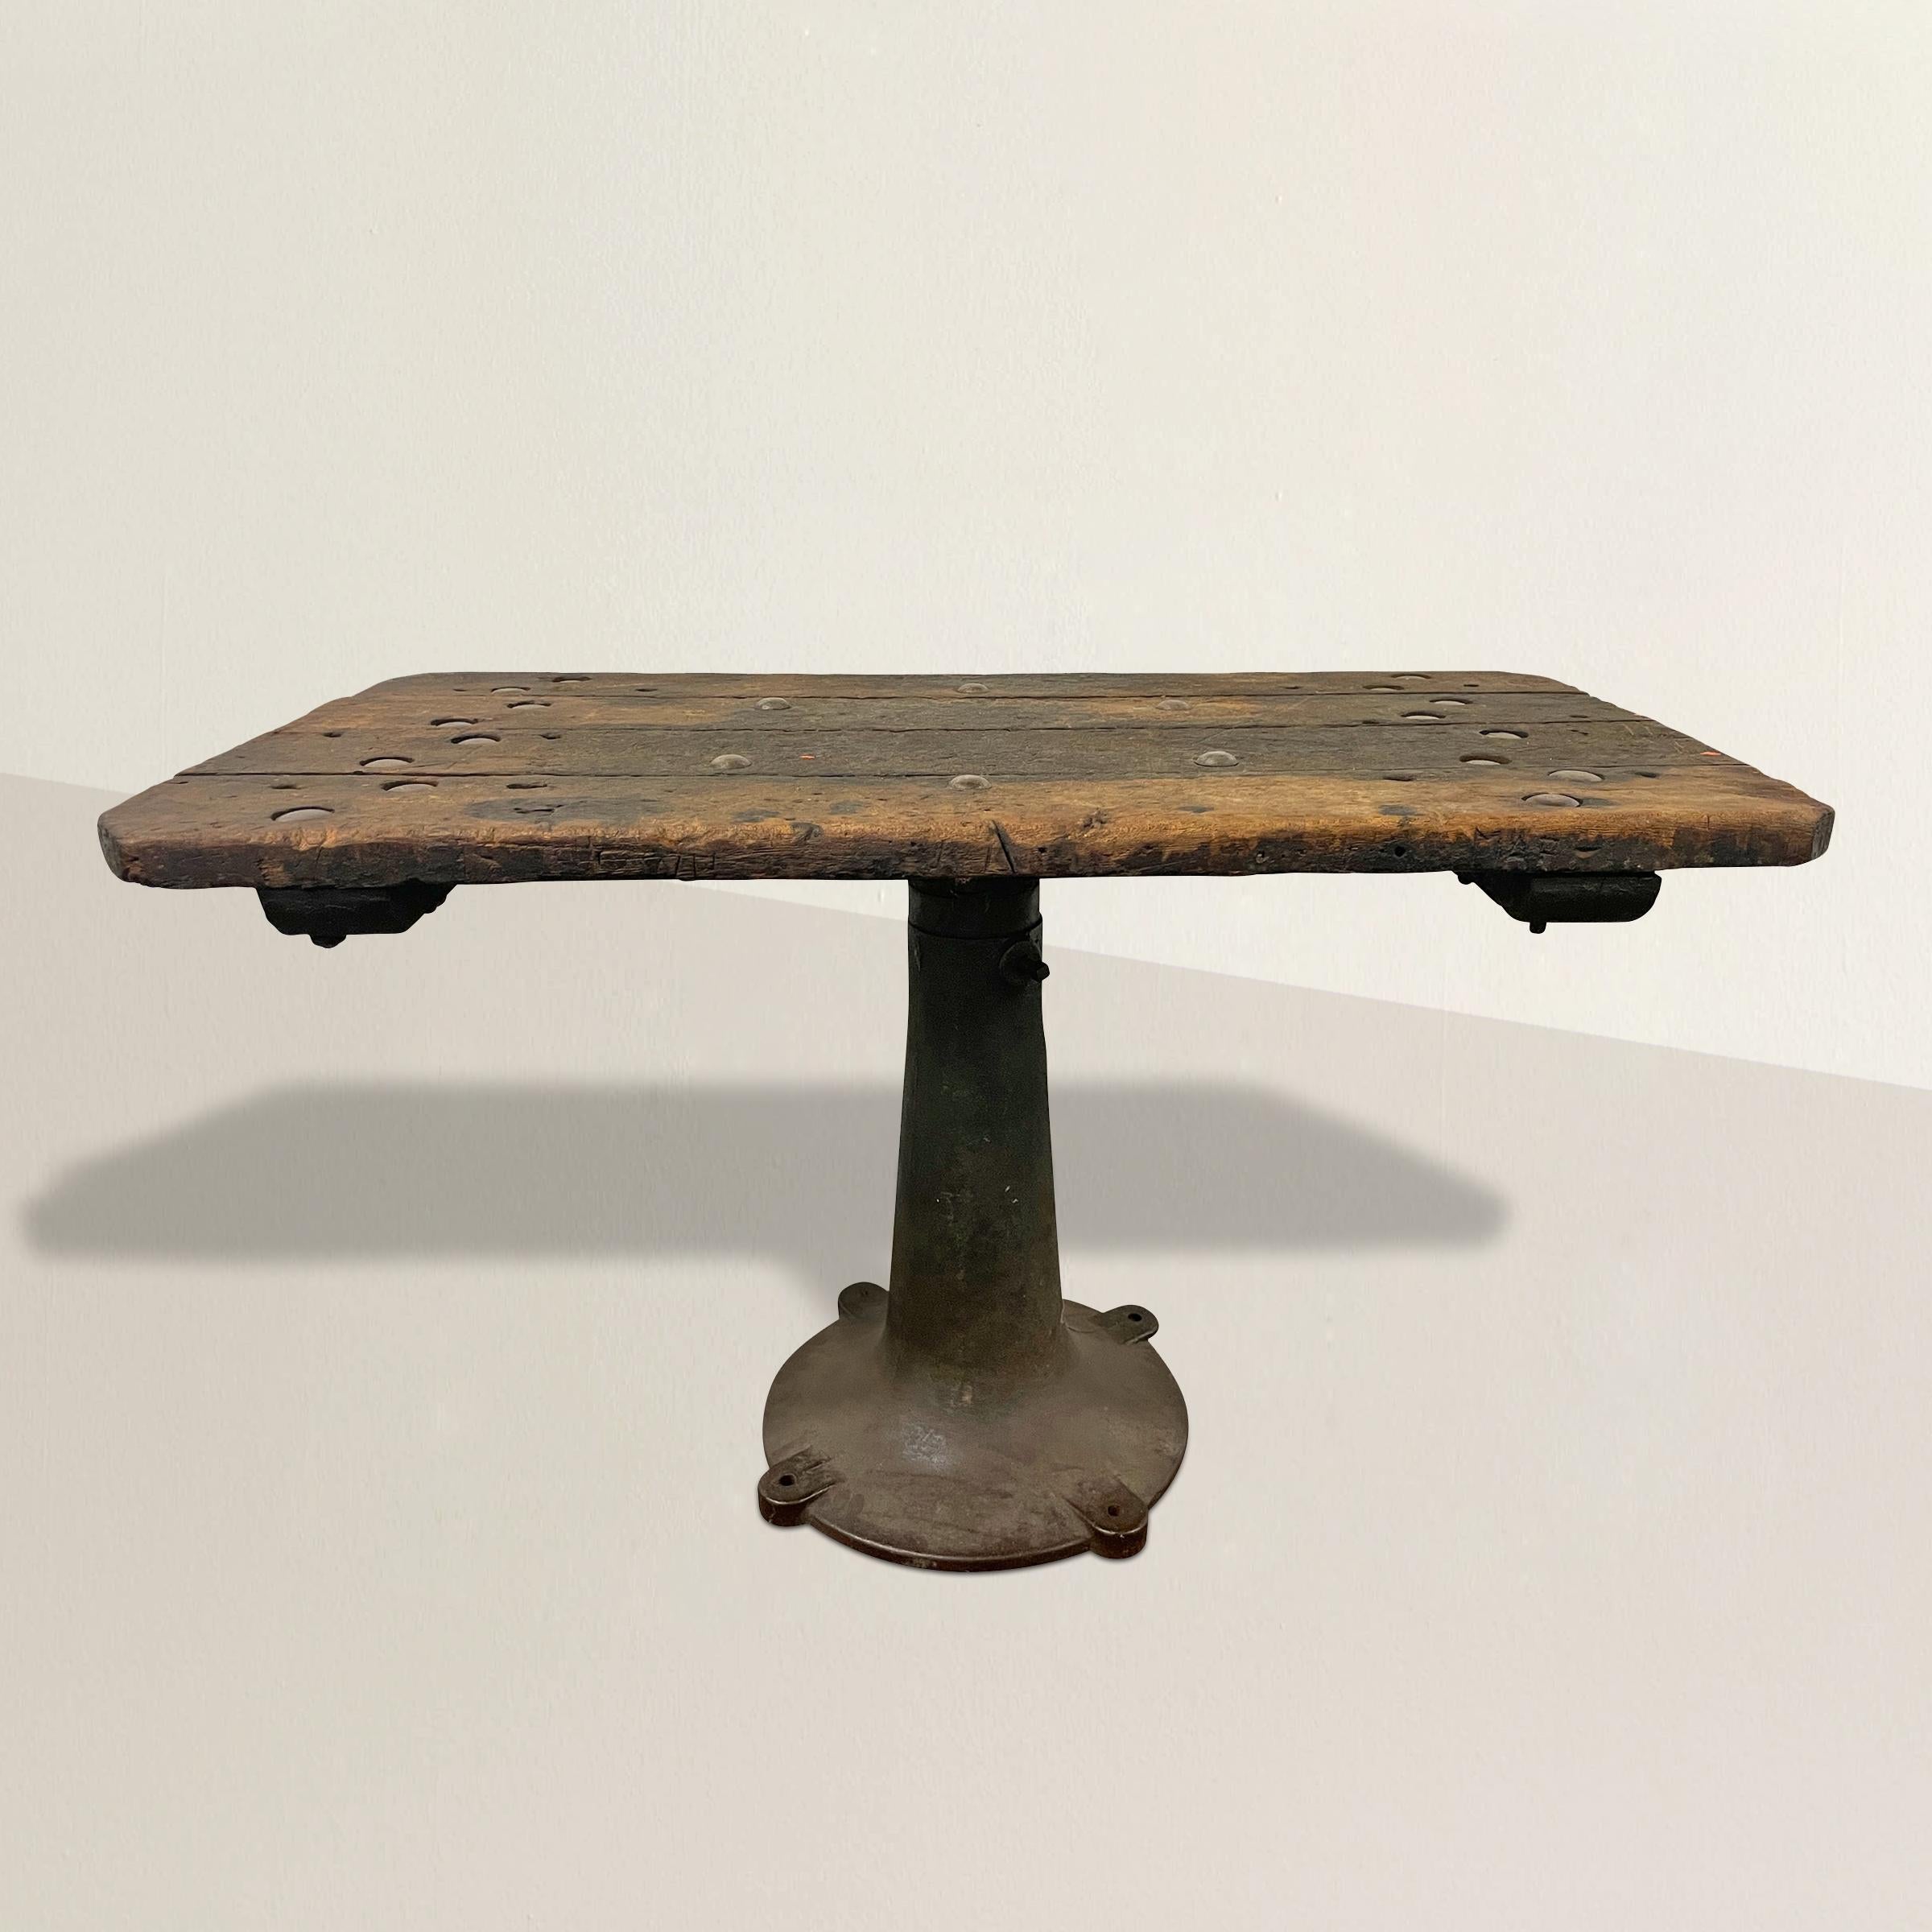 A robust and handsome early 20th century American industrial console table with a the most wonderful well-worn wood top with large steel rivets that attach the table to a heavy round iron base. Table is perfectly sized to fit in your entry, or